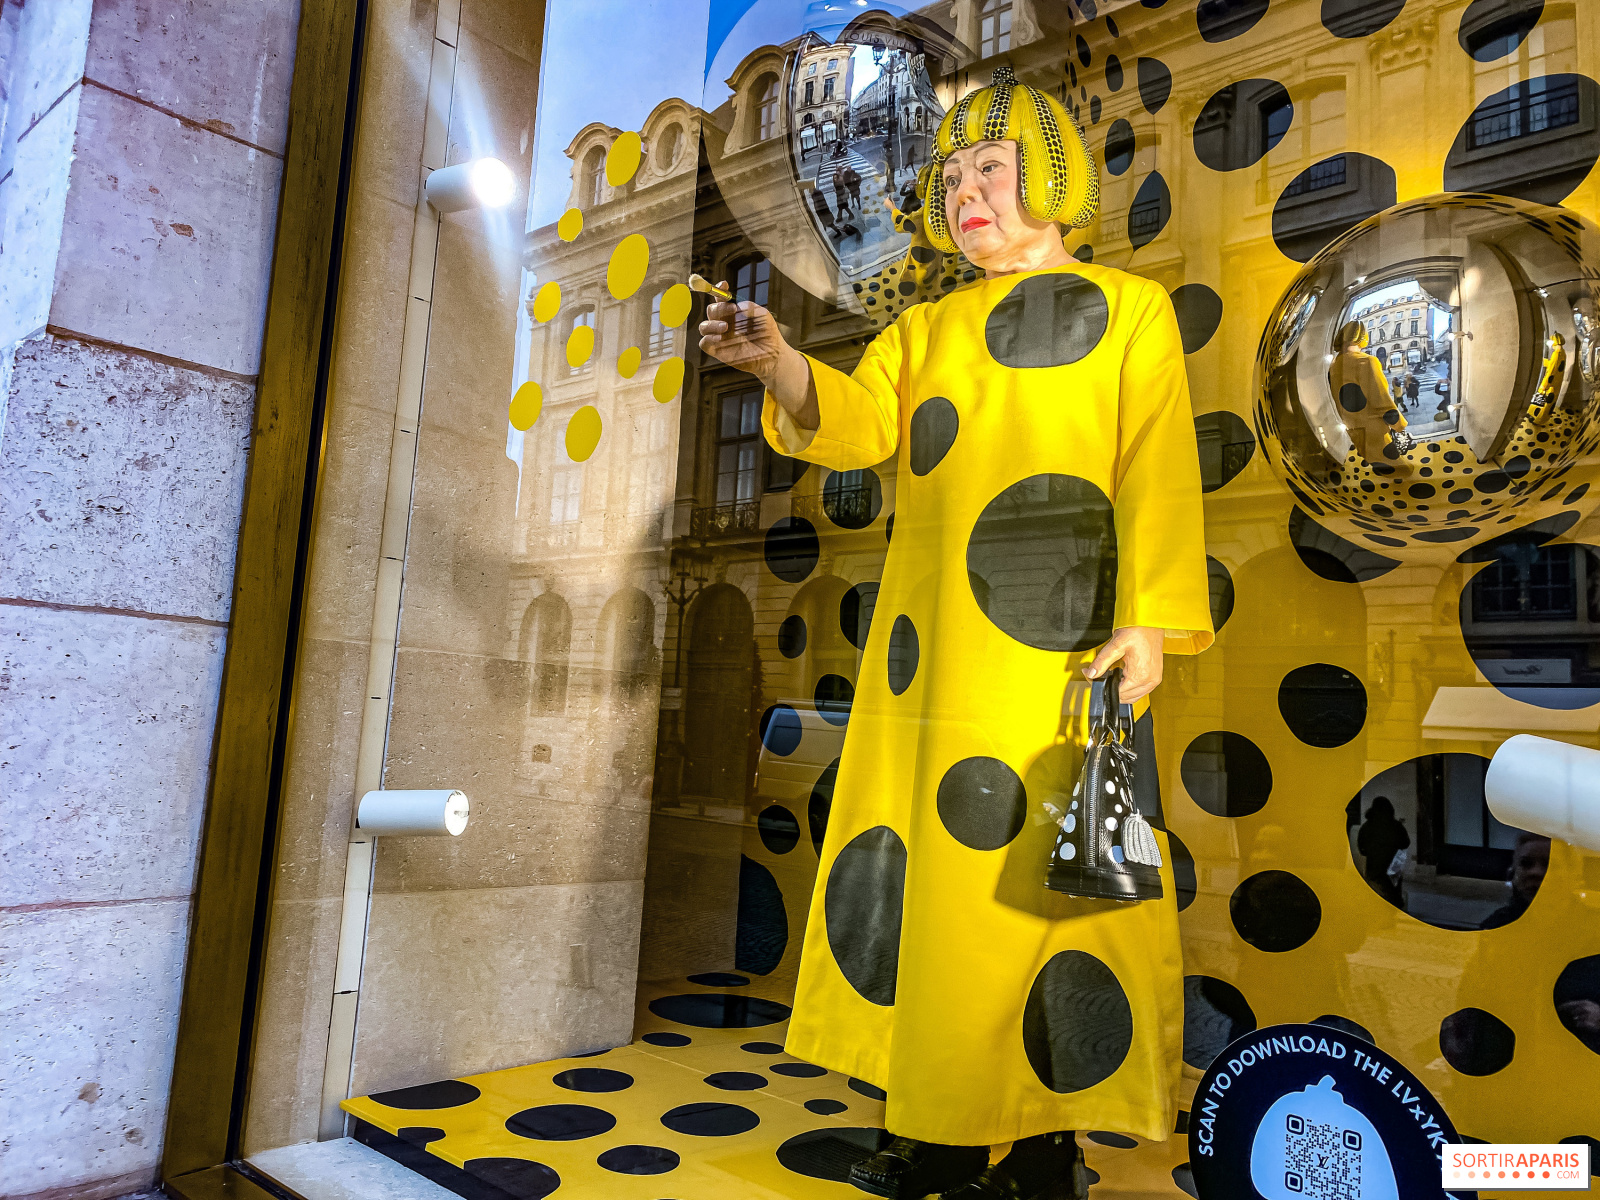 The gigantic Yayoi Kusama in front of the Louis Vuitton